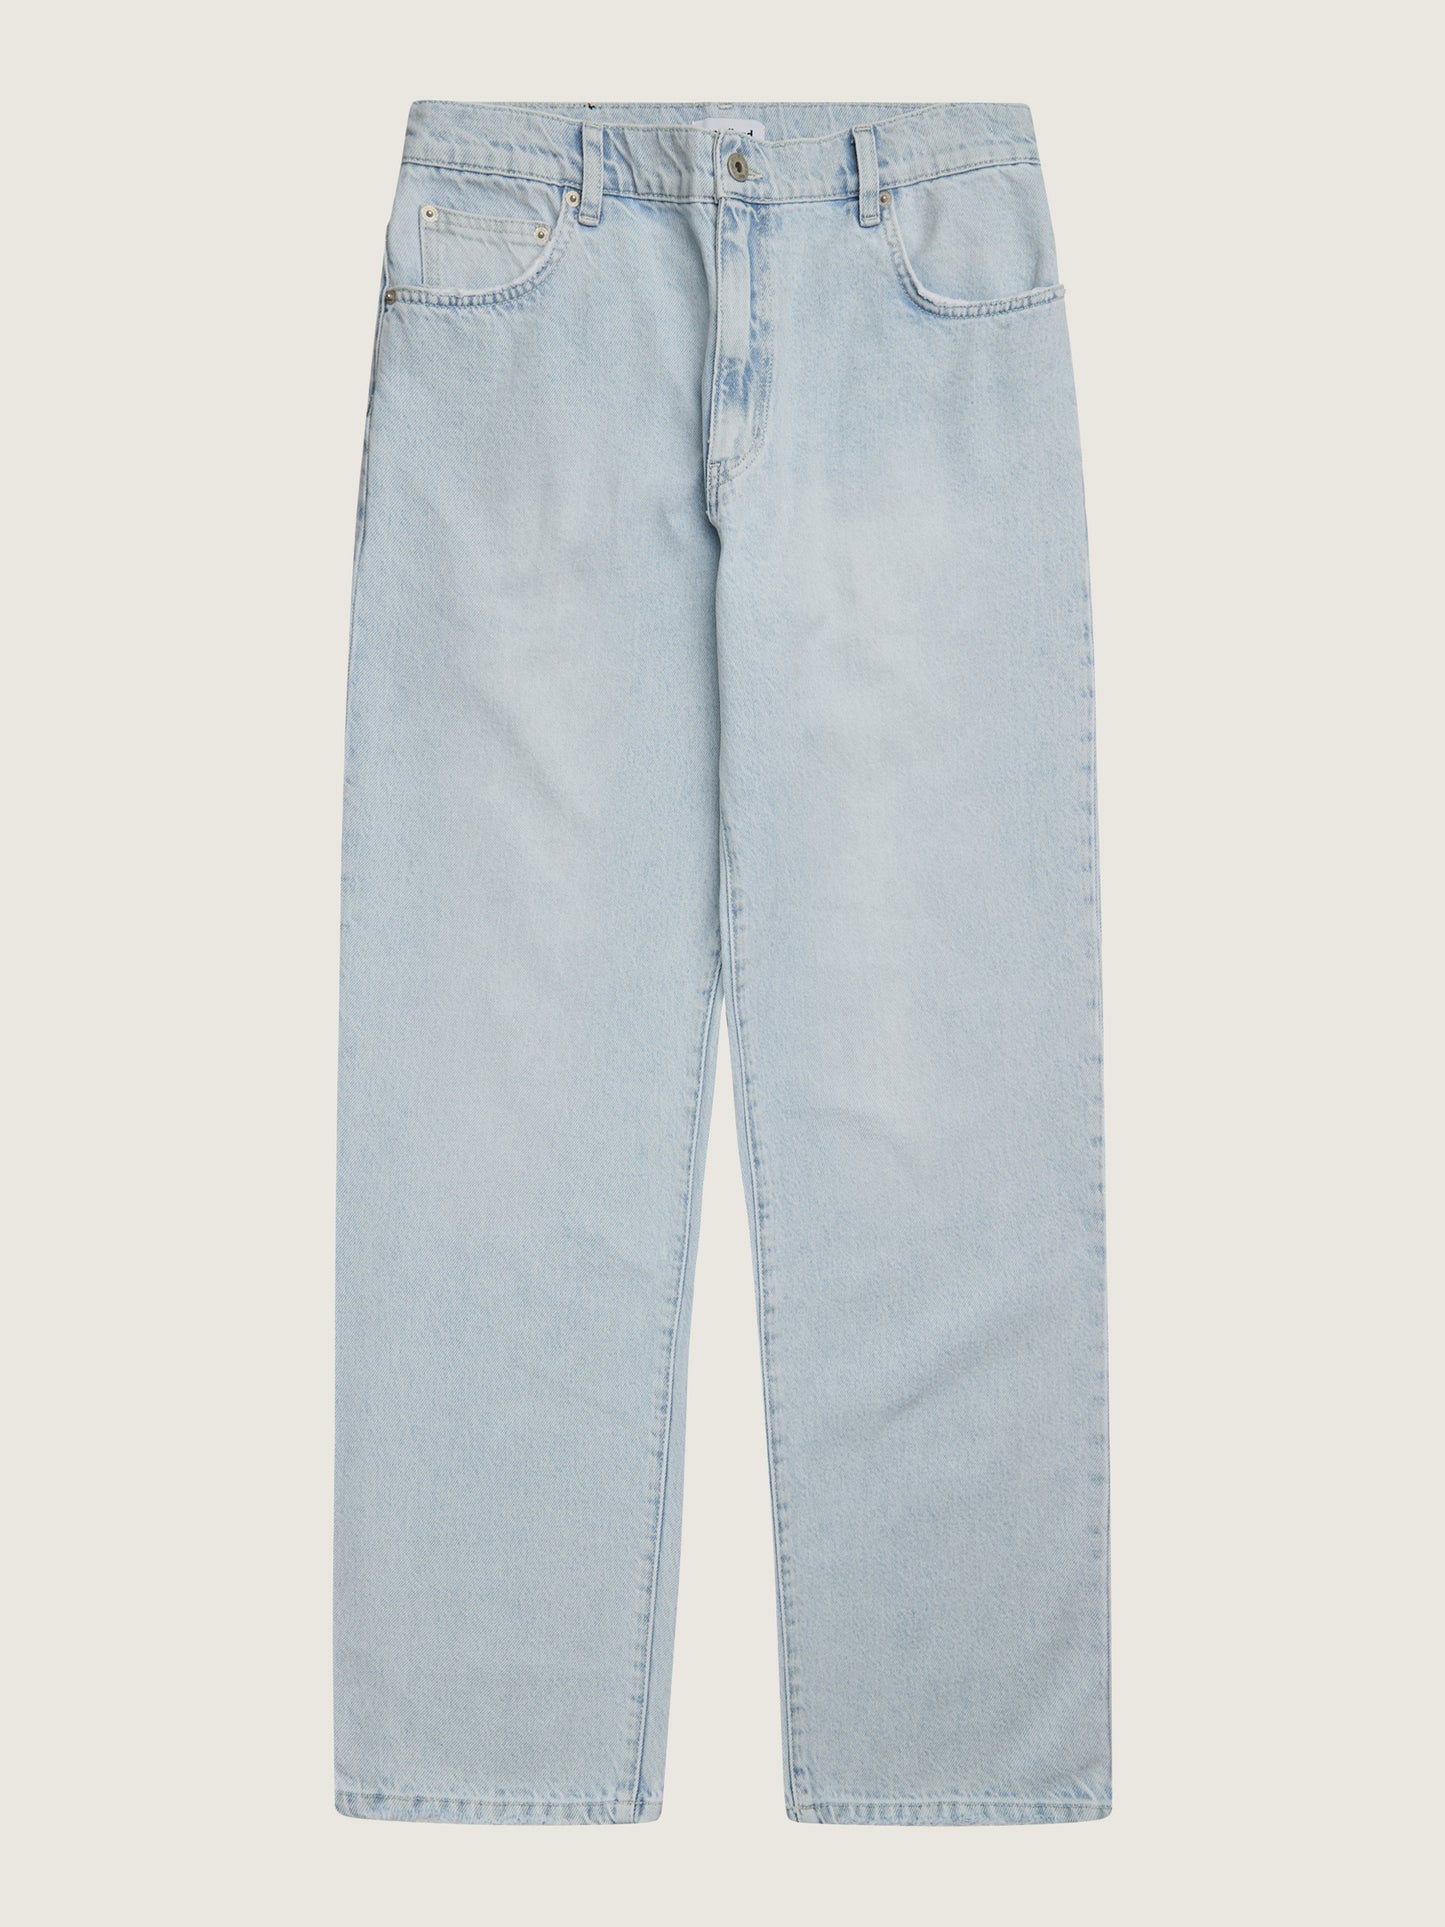 Woodbird Leroy Holiday Jeans Jeans Washed Blue